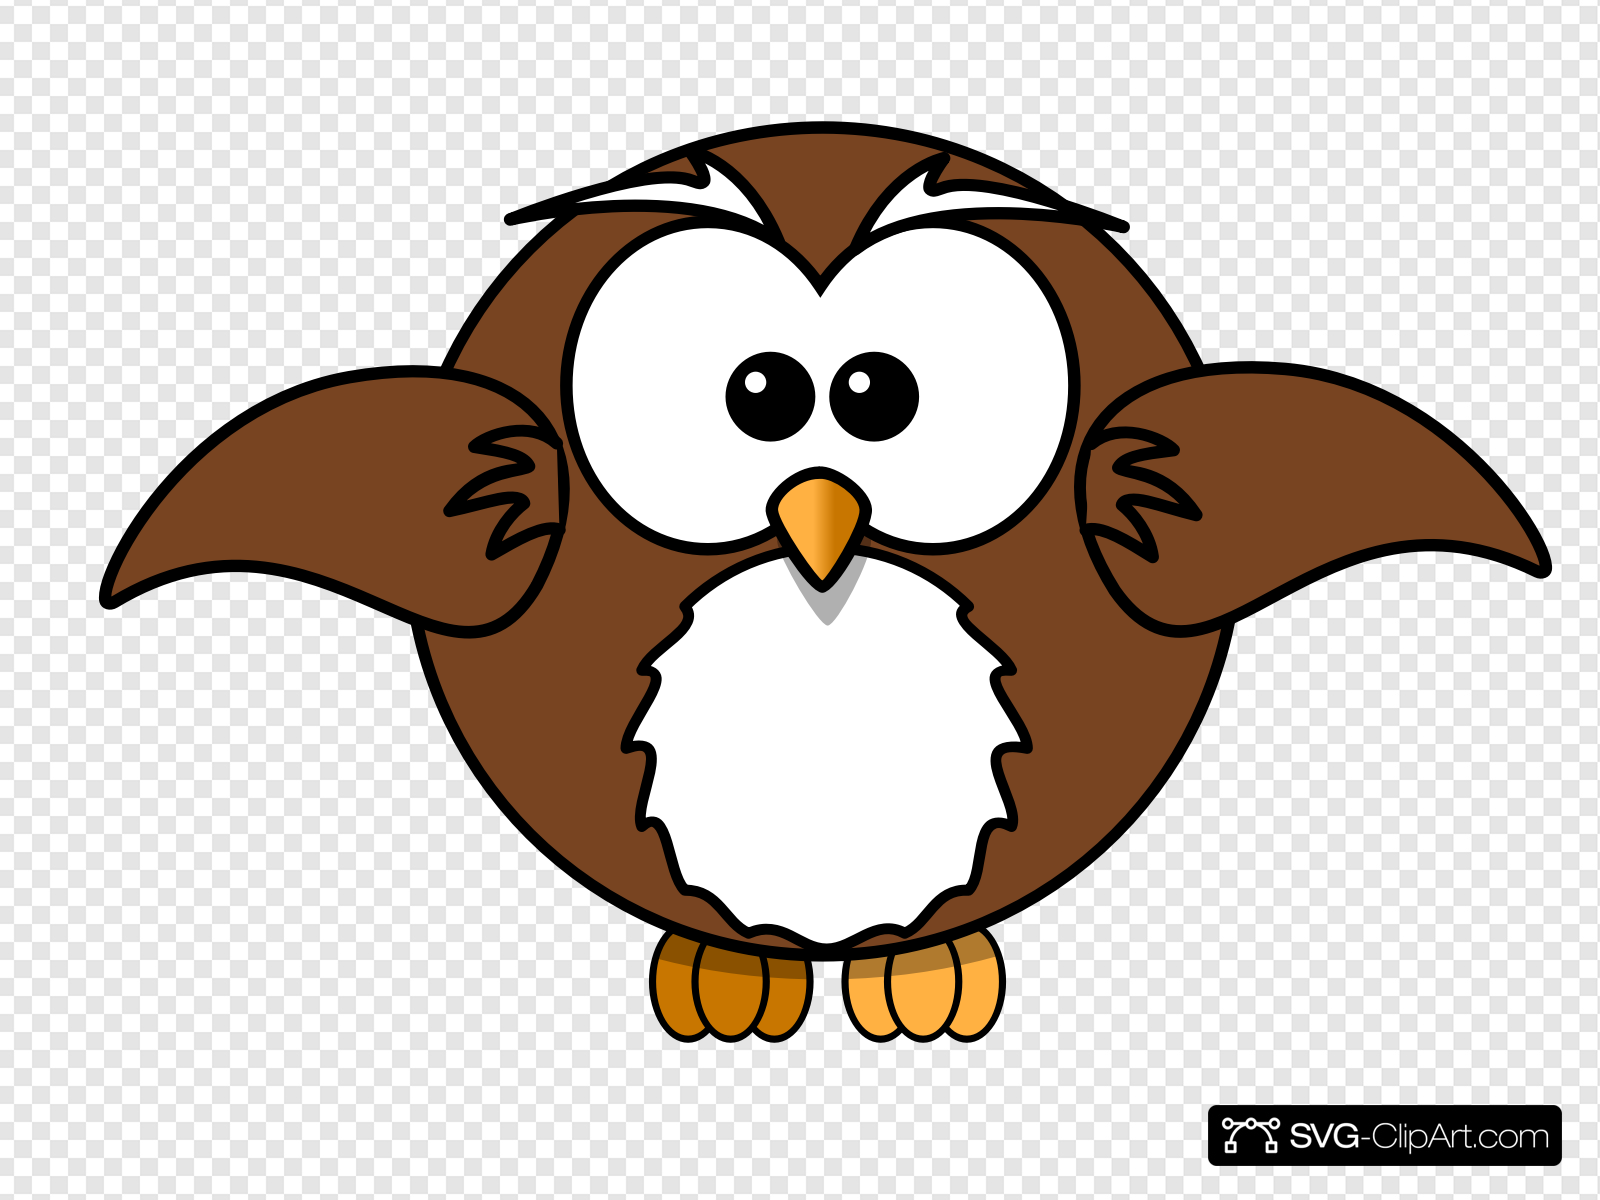 Big Brown Owl Clip art, Icon and SVG